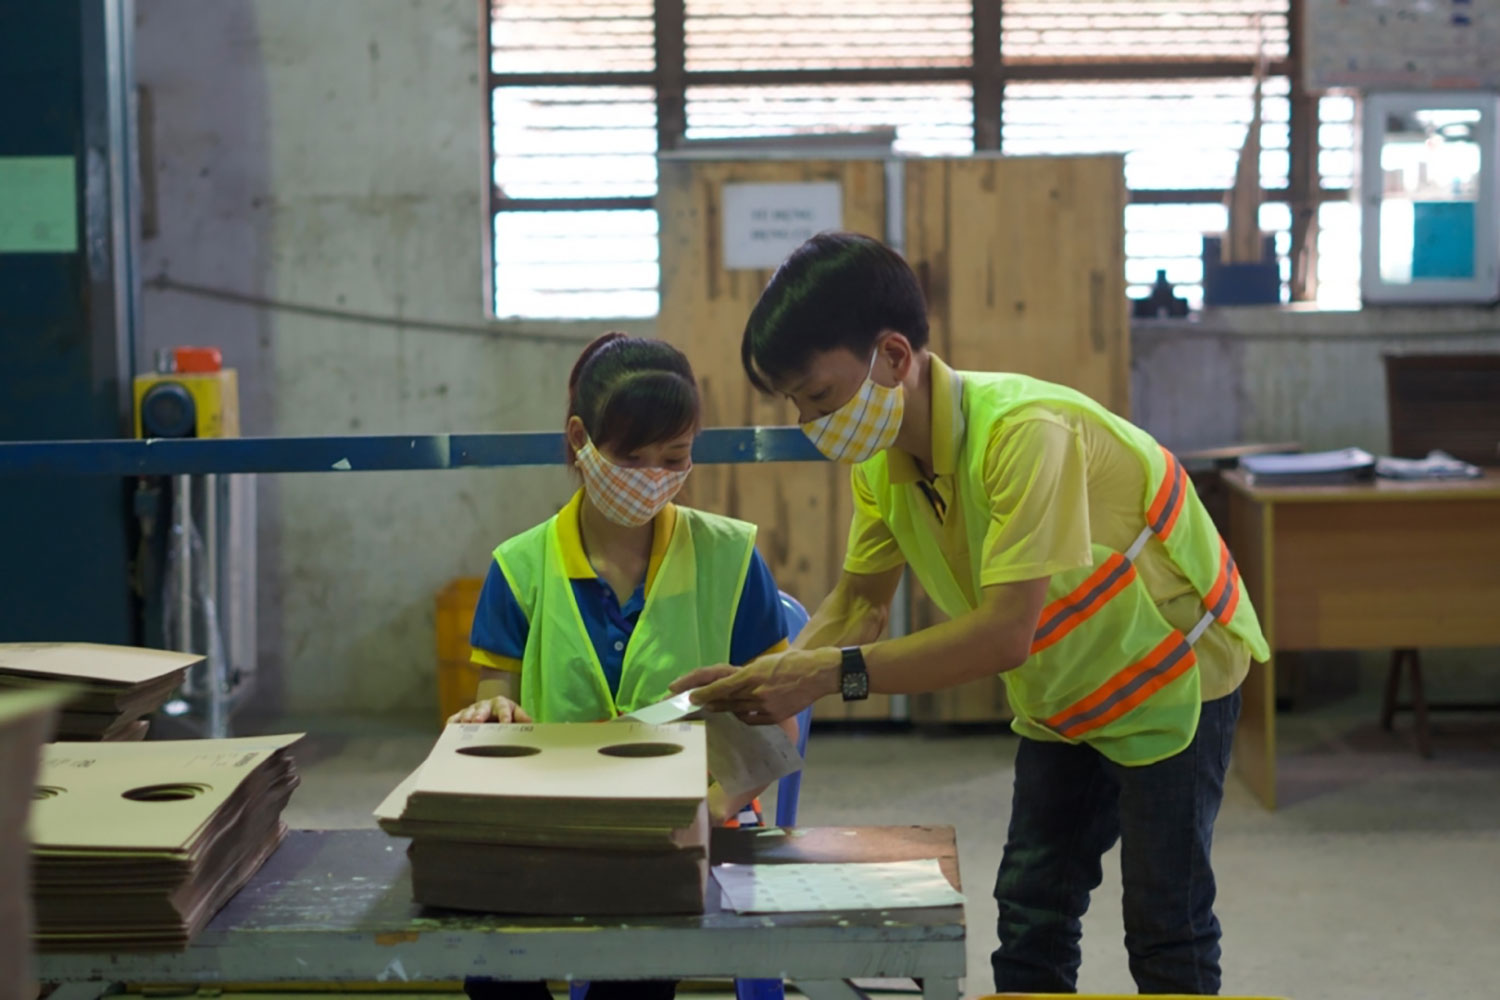 Video: Vietnamese Girl Gets Access to Decent Work and Training Through Factory Youth Programme